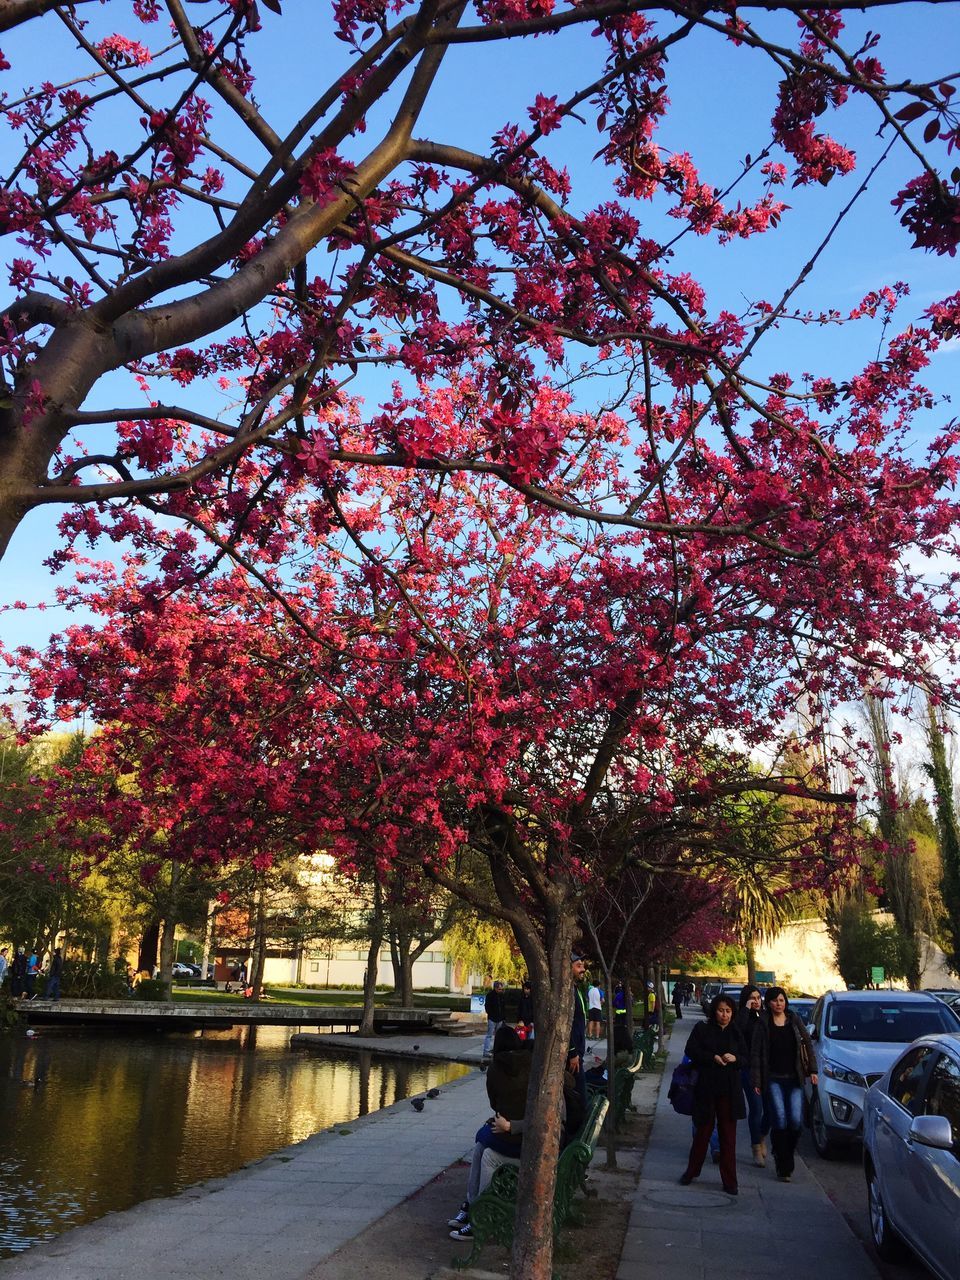 tree, branch, water, flower, large group of people, city, park - man made space, person, tourism, travel destinations, beauty in nature, growth, pink color, nature, cherry blossom, day, sunny, city life, cherry tree, vacations, footpath, tranquil scene, tranquility, scenics, blossom, sky, treelined